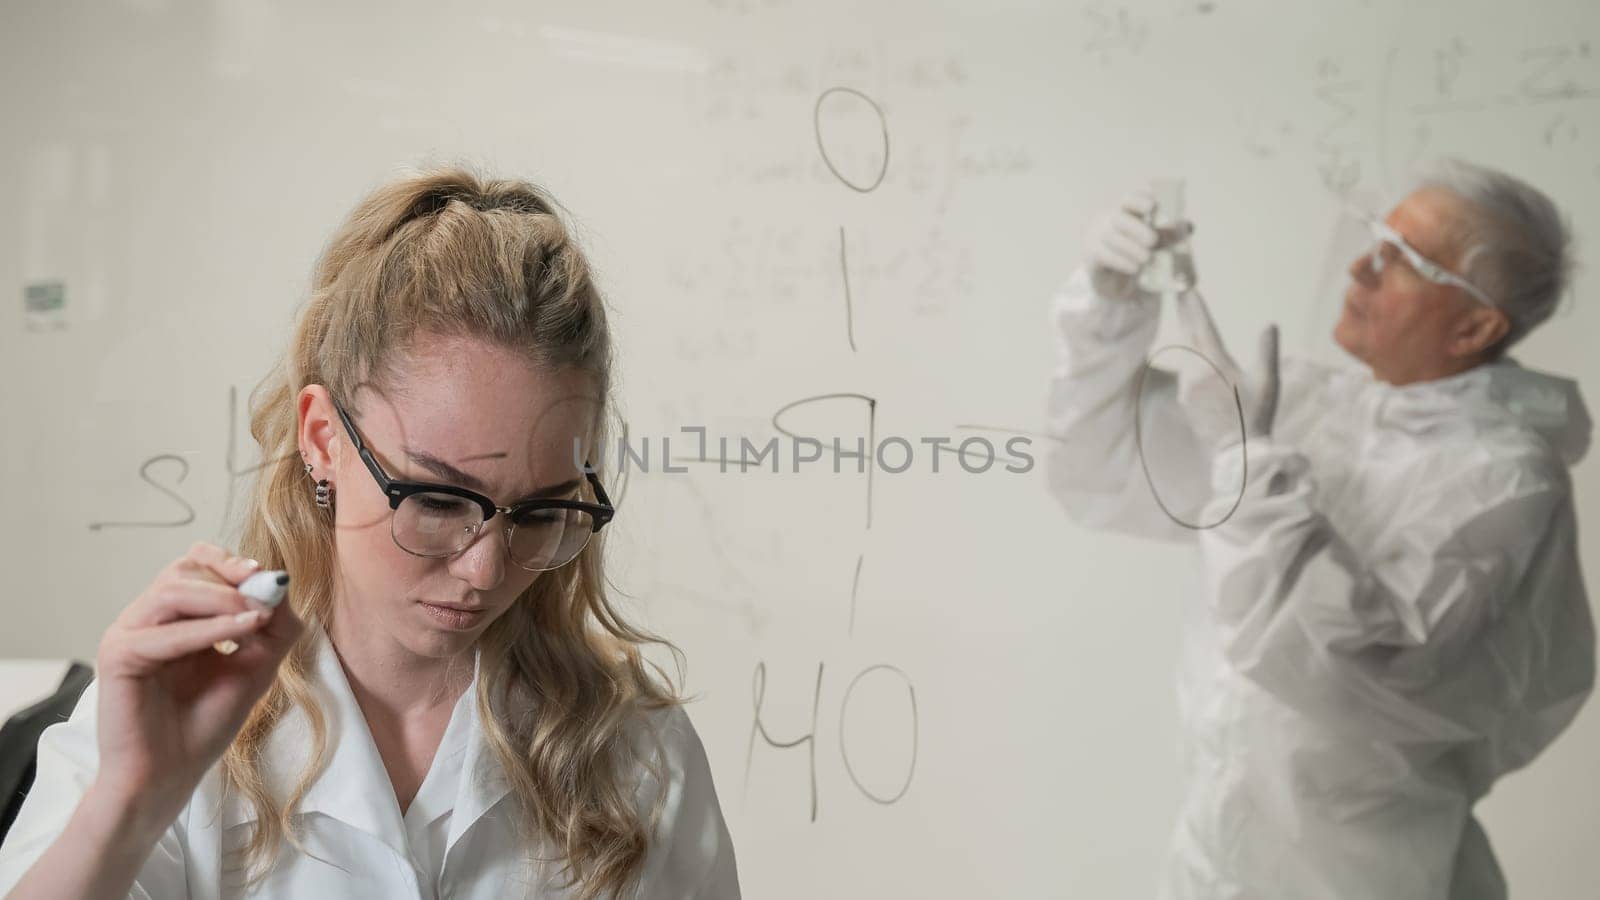 A woman chemist writes a formula on glass. An elderly Caucasian man in a protective suit is doing tests. by mrwed54